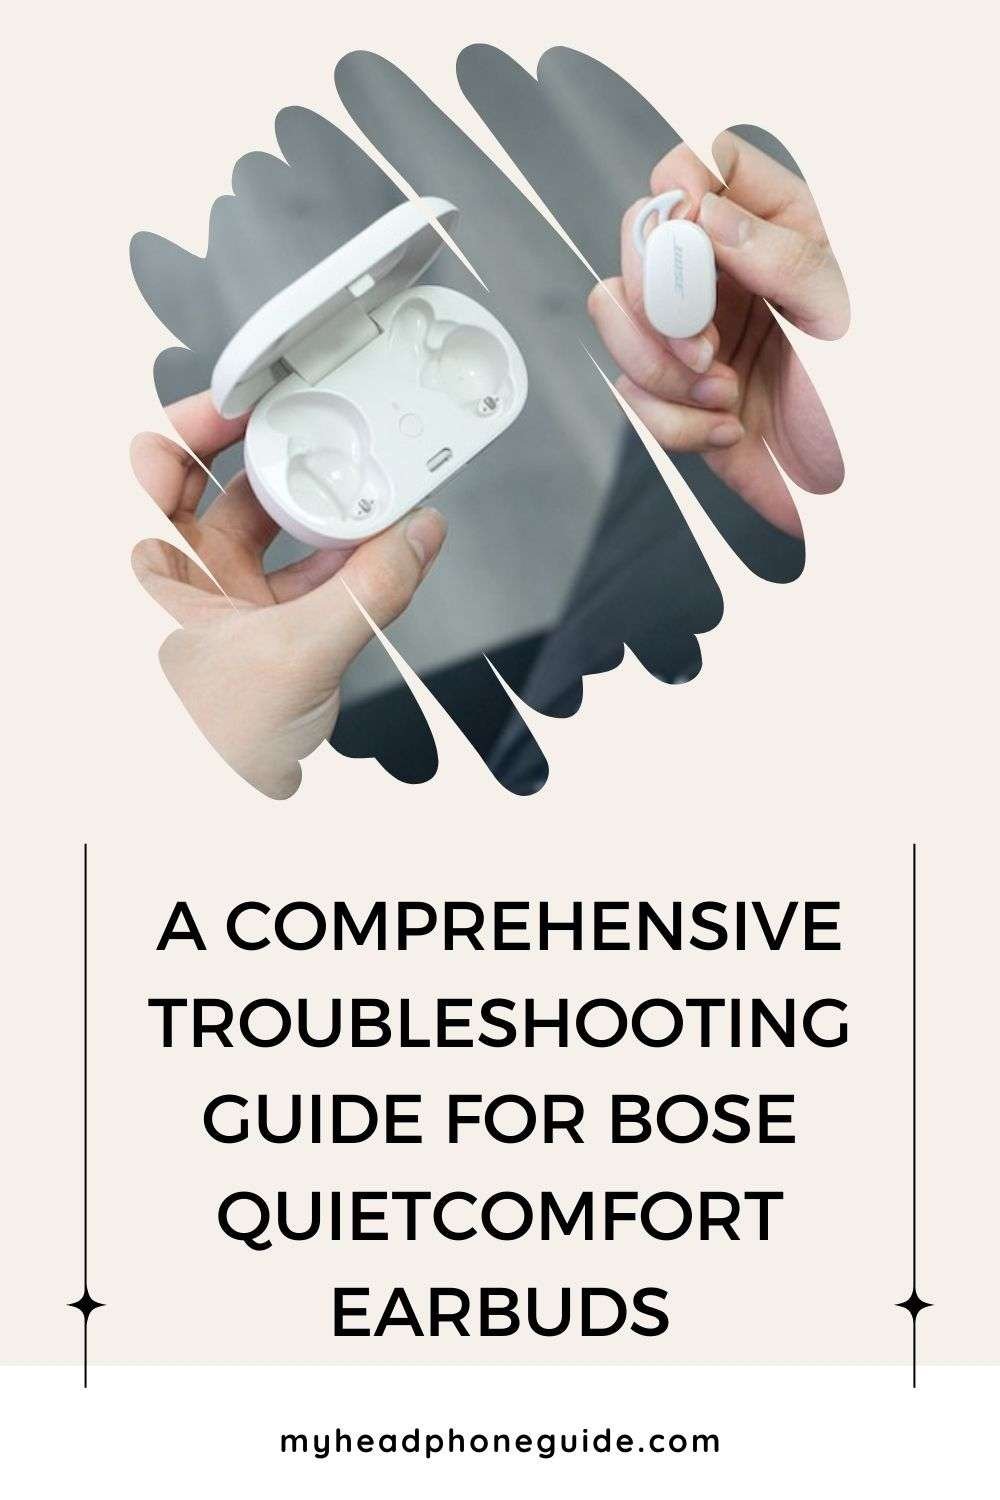 A Comprehensive Troubleshooting Guide for Bose QuietComfort Earbuds